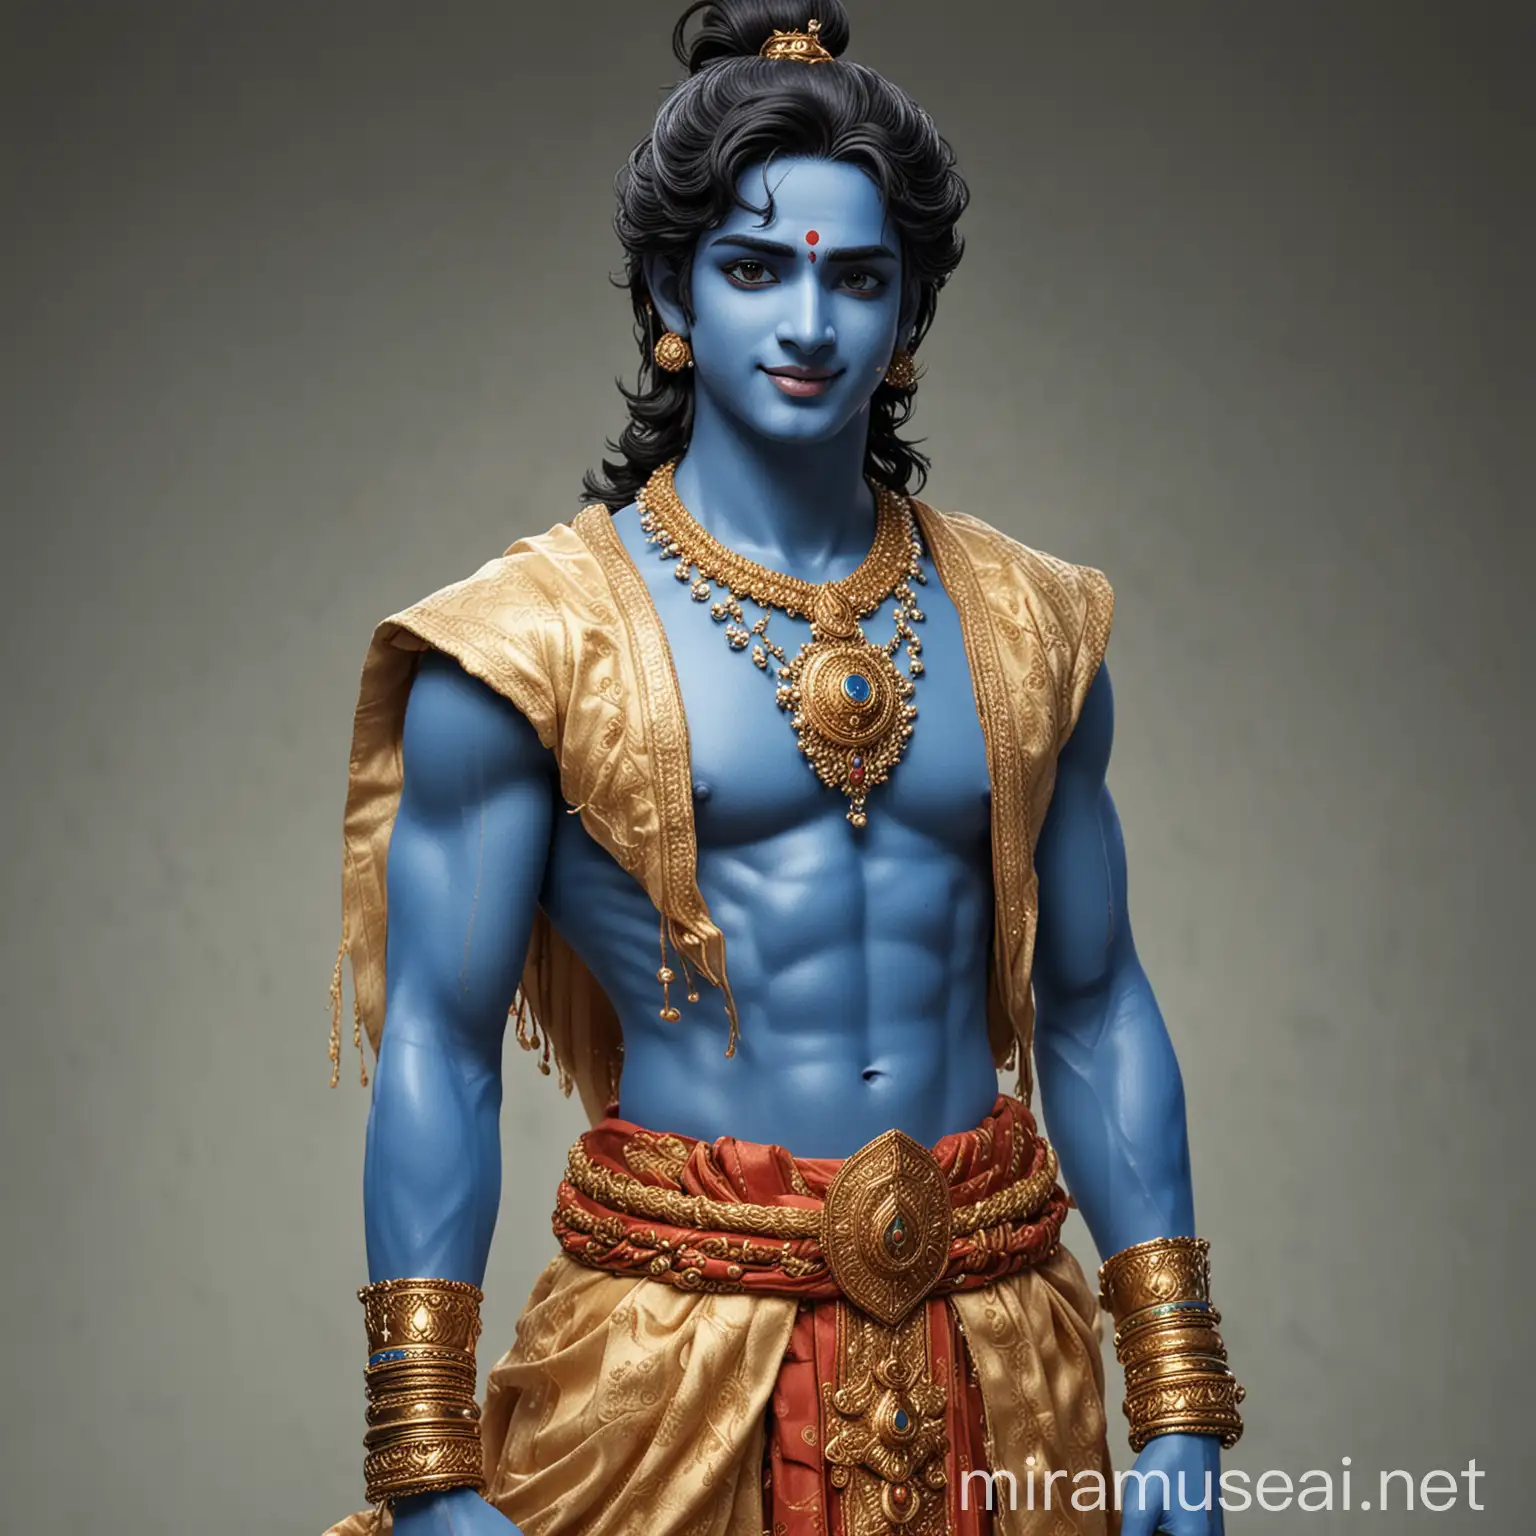 Krishna, Handsome face,abs, blue body, blue eyes, the blue colour face, jawline face, blueskin, mahabharata background, Lord Krishna outfit, Lord Krishna makeup, Japanese anime, full body photo, standing pose, smile, face facing the camera